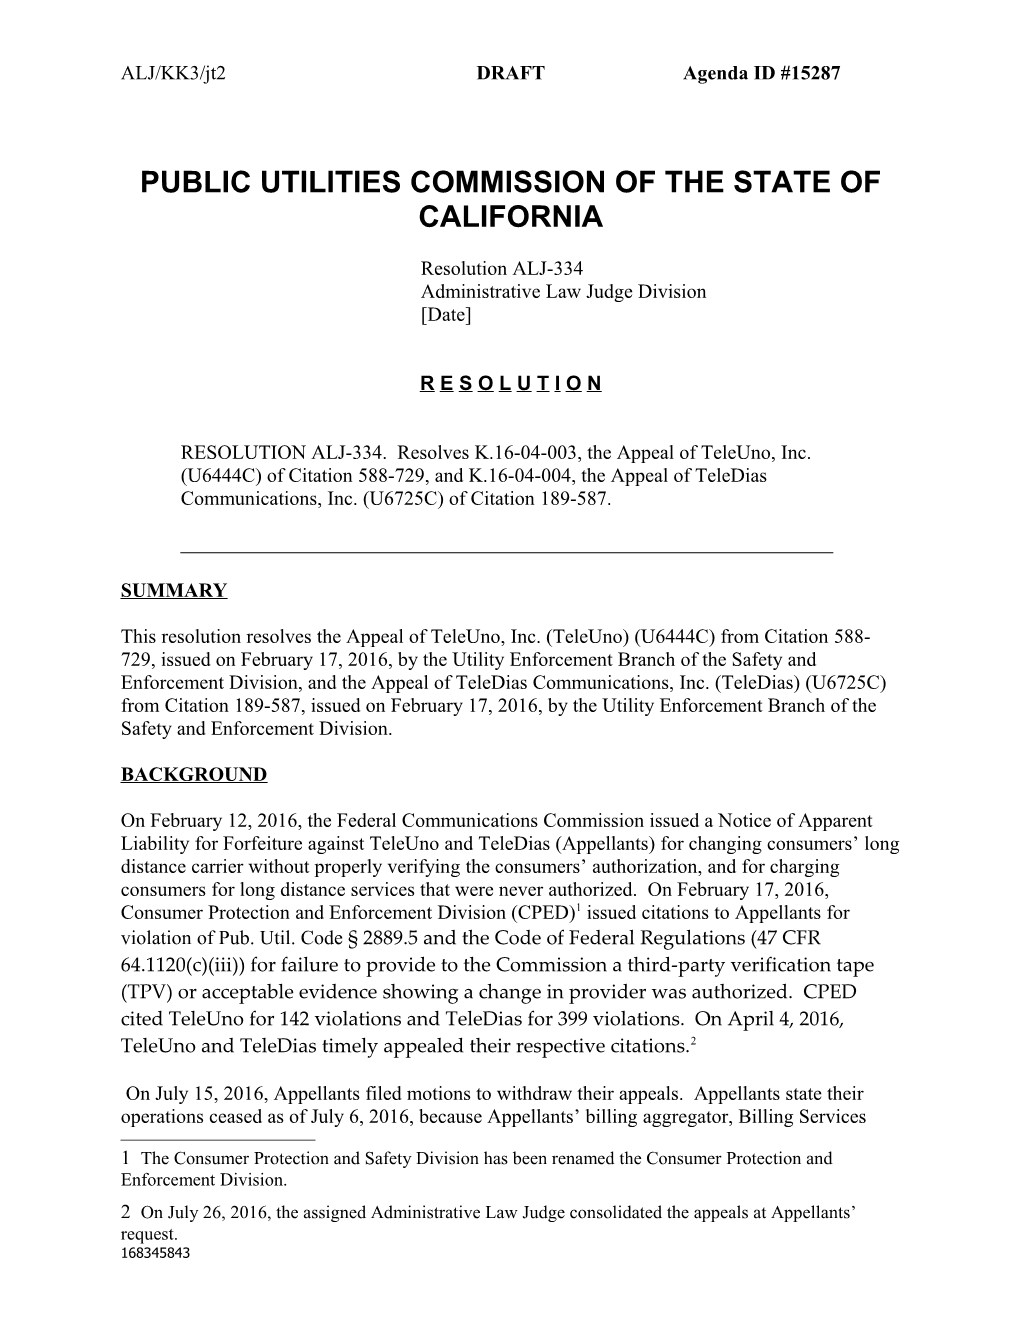 Public Utilities Commission of the State of California s56